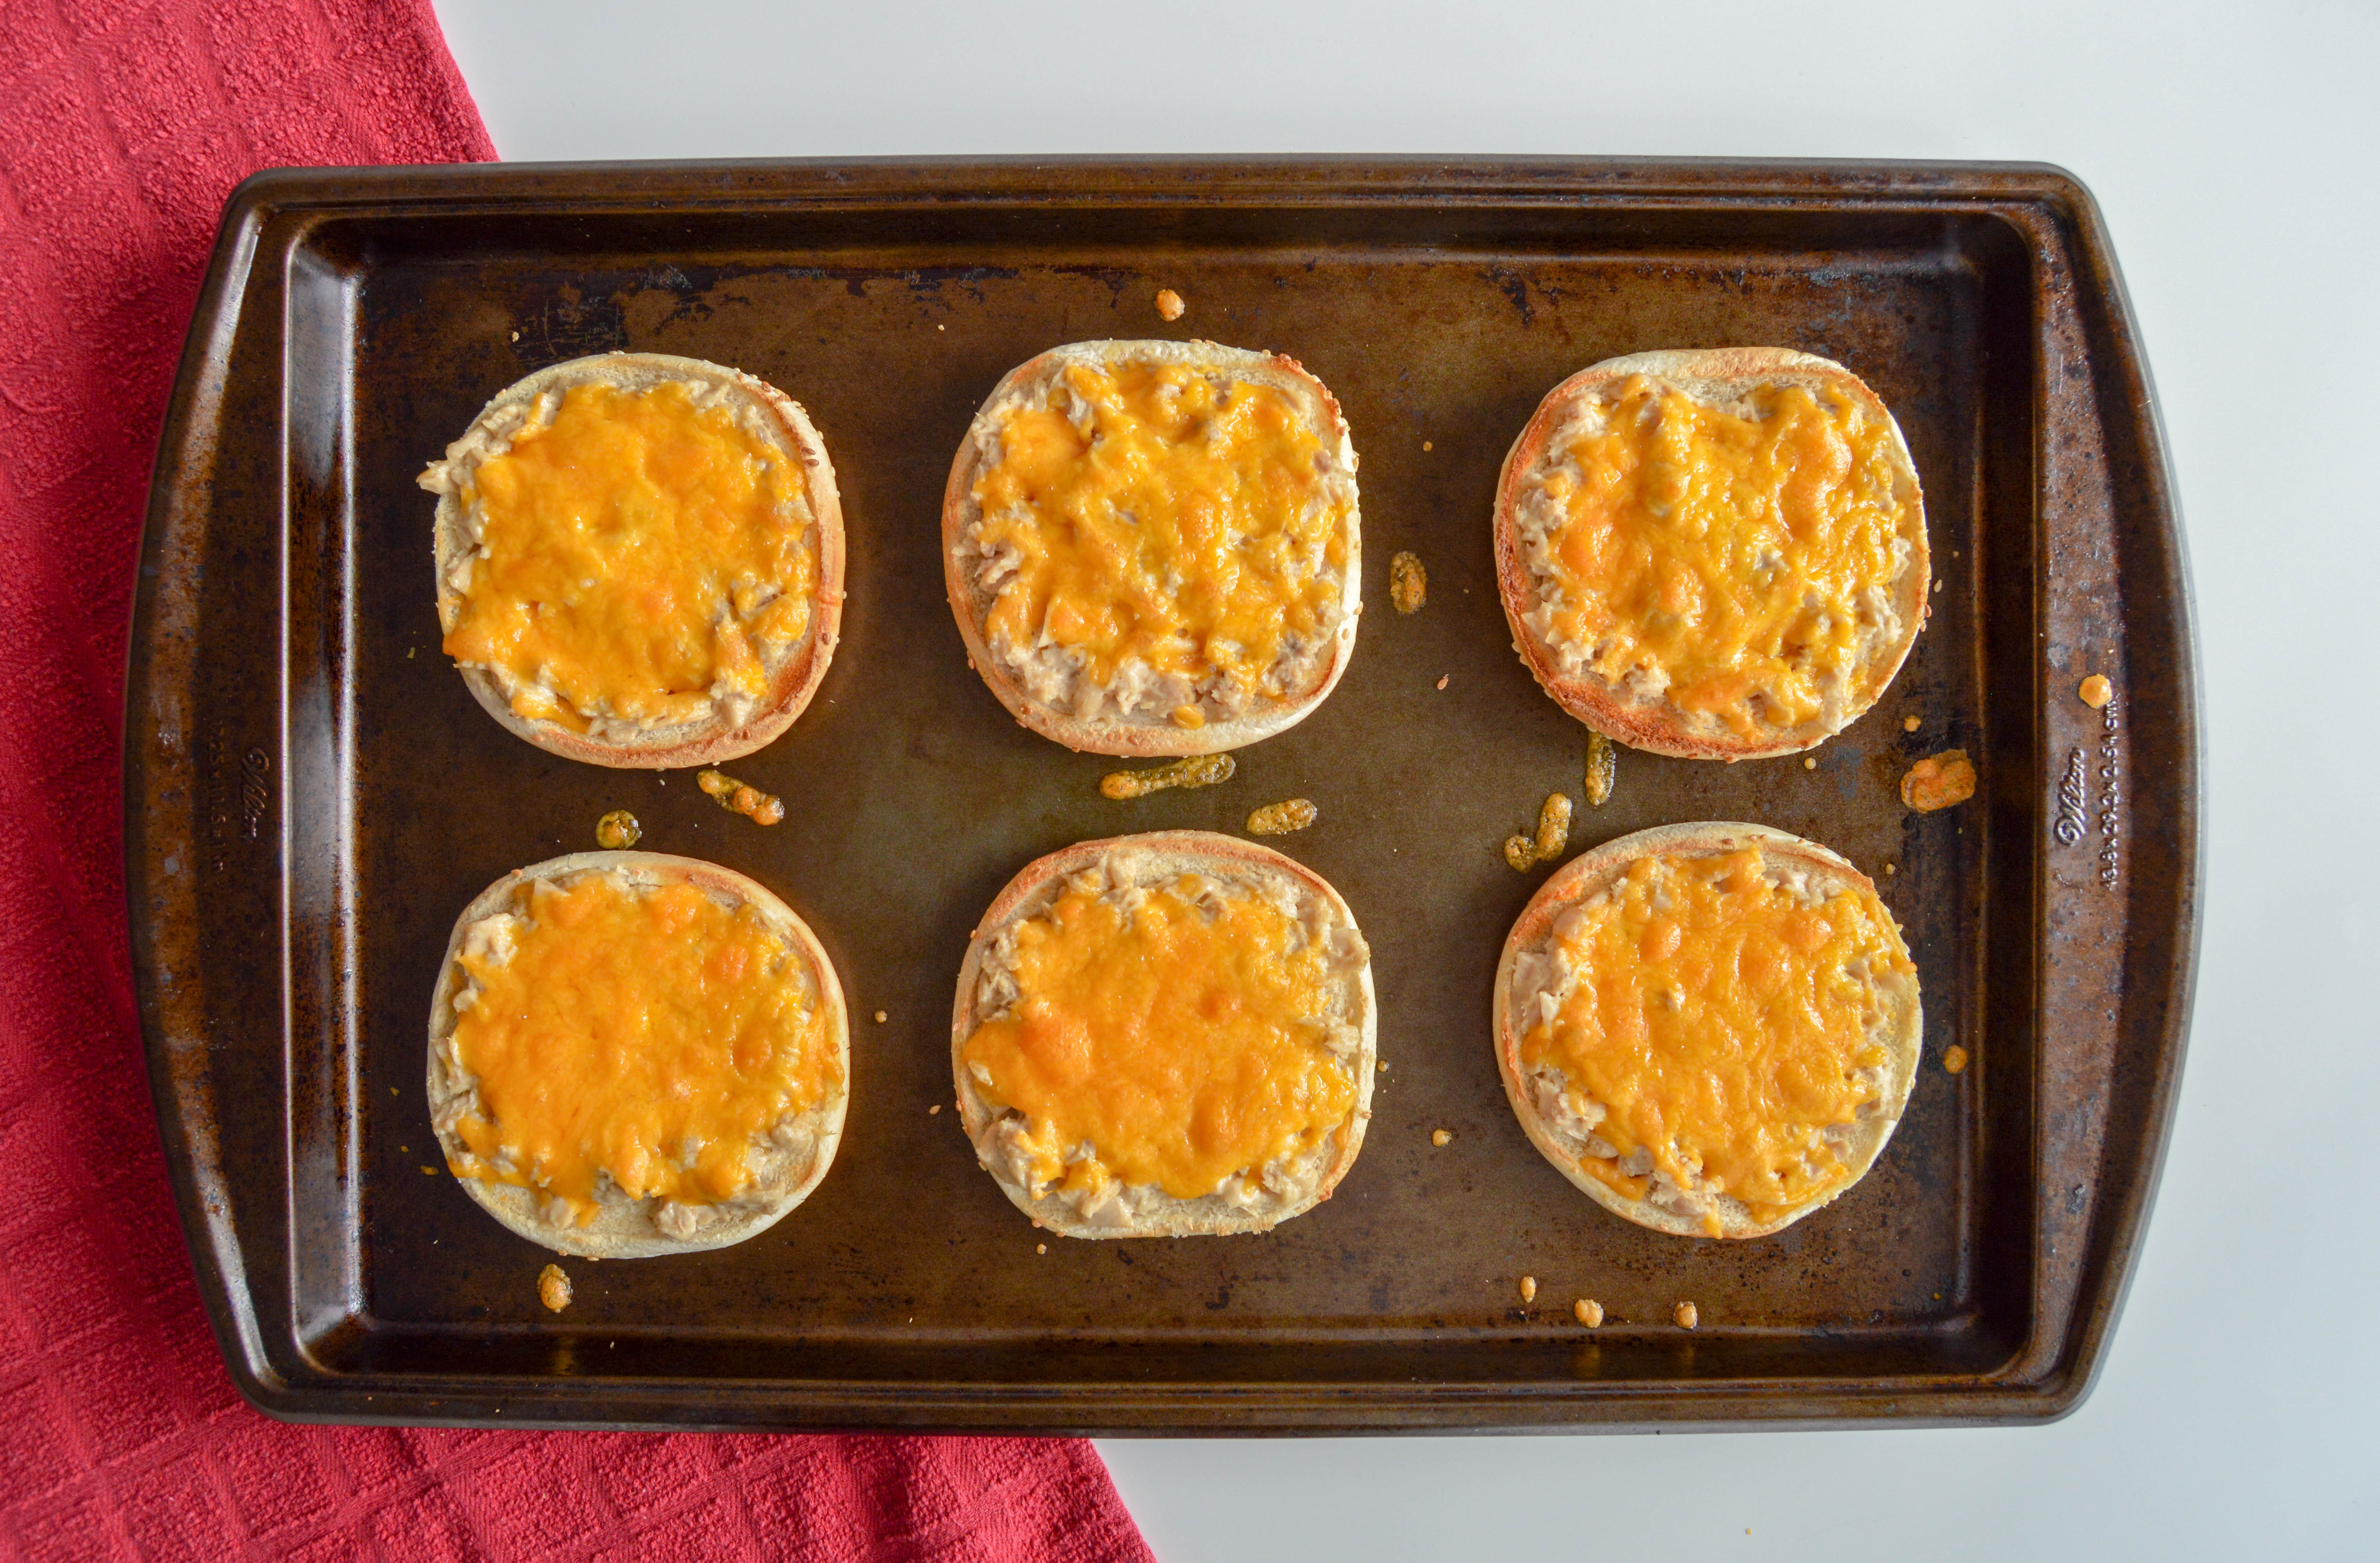 Oven baked tuna melt bunwiches for an easy, quick dinner.